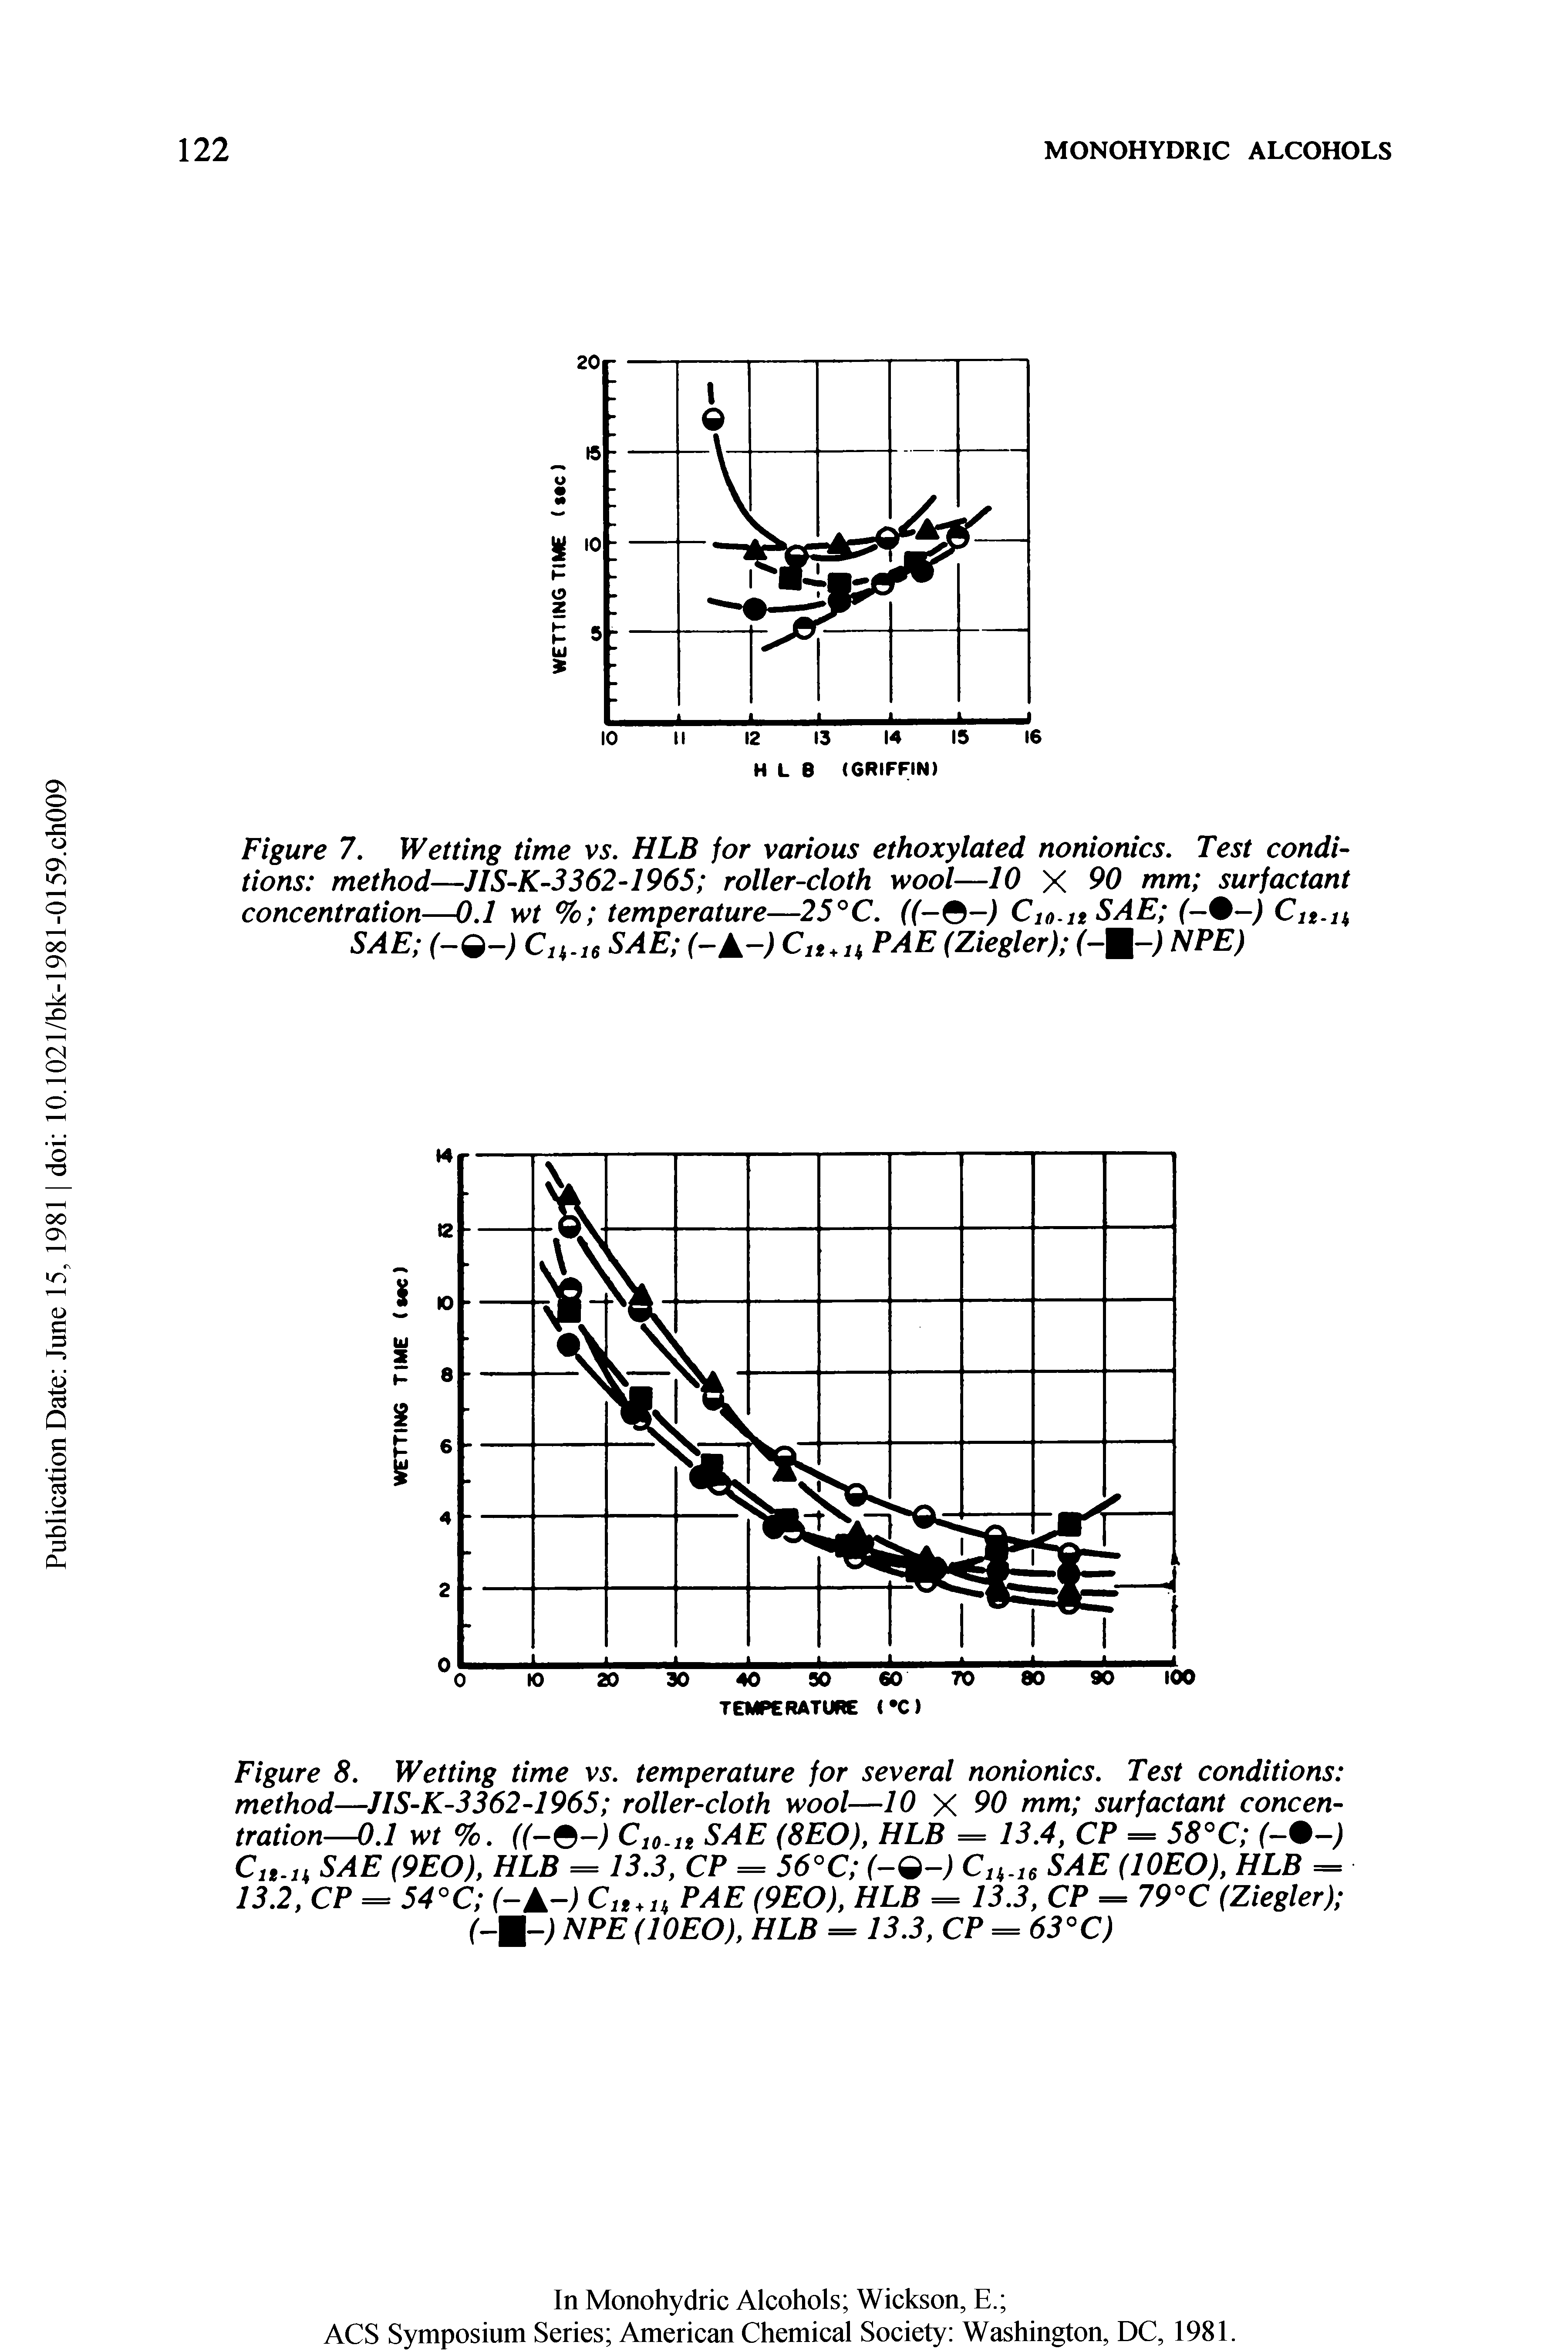 Figure 7. Wetting time vs. HLB for various ethoxylated nonionics. Test conditions method—JIS-K-3362-1965 roller-cloth wool—10 X 90 mm surfactant concentration—0.1 wt % temperature—25°C. (he-) C10.itSAE (-%-) Clt.n SAE (-Q-) Cu.16 SAE hA ) Clt + n PAE (Ziegler) (-M ) NPE)...